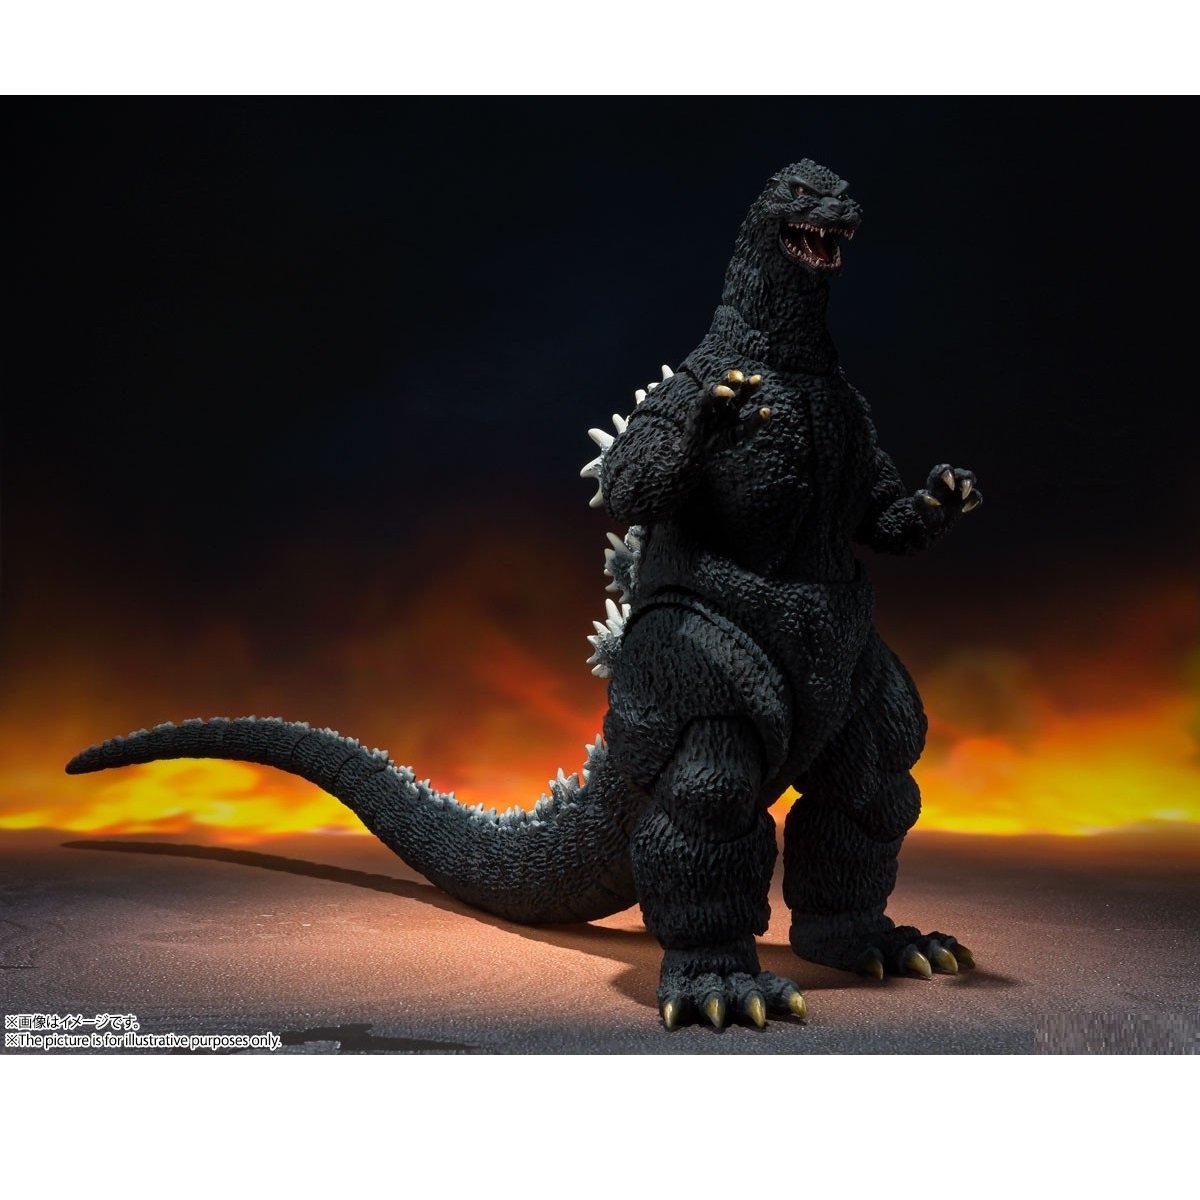 S.H.MonsterArts Godzilla - 1989 (Completed)-Bandai-Ace Cards & Collectibles